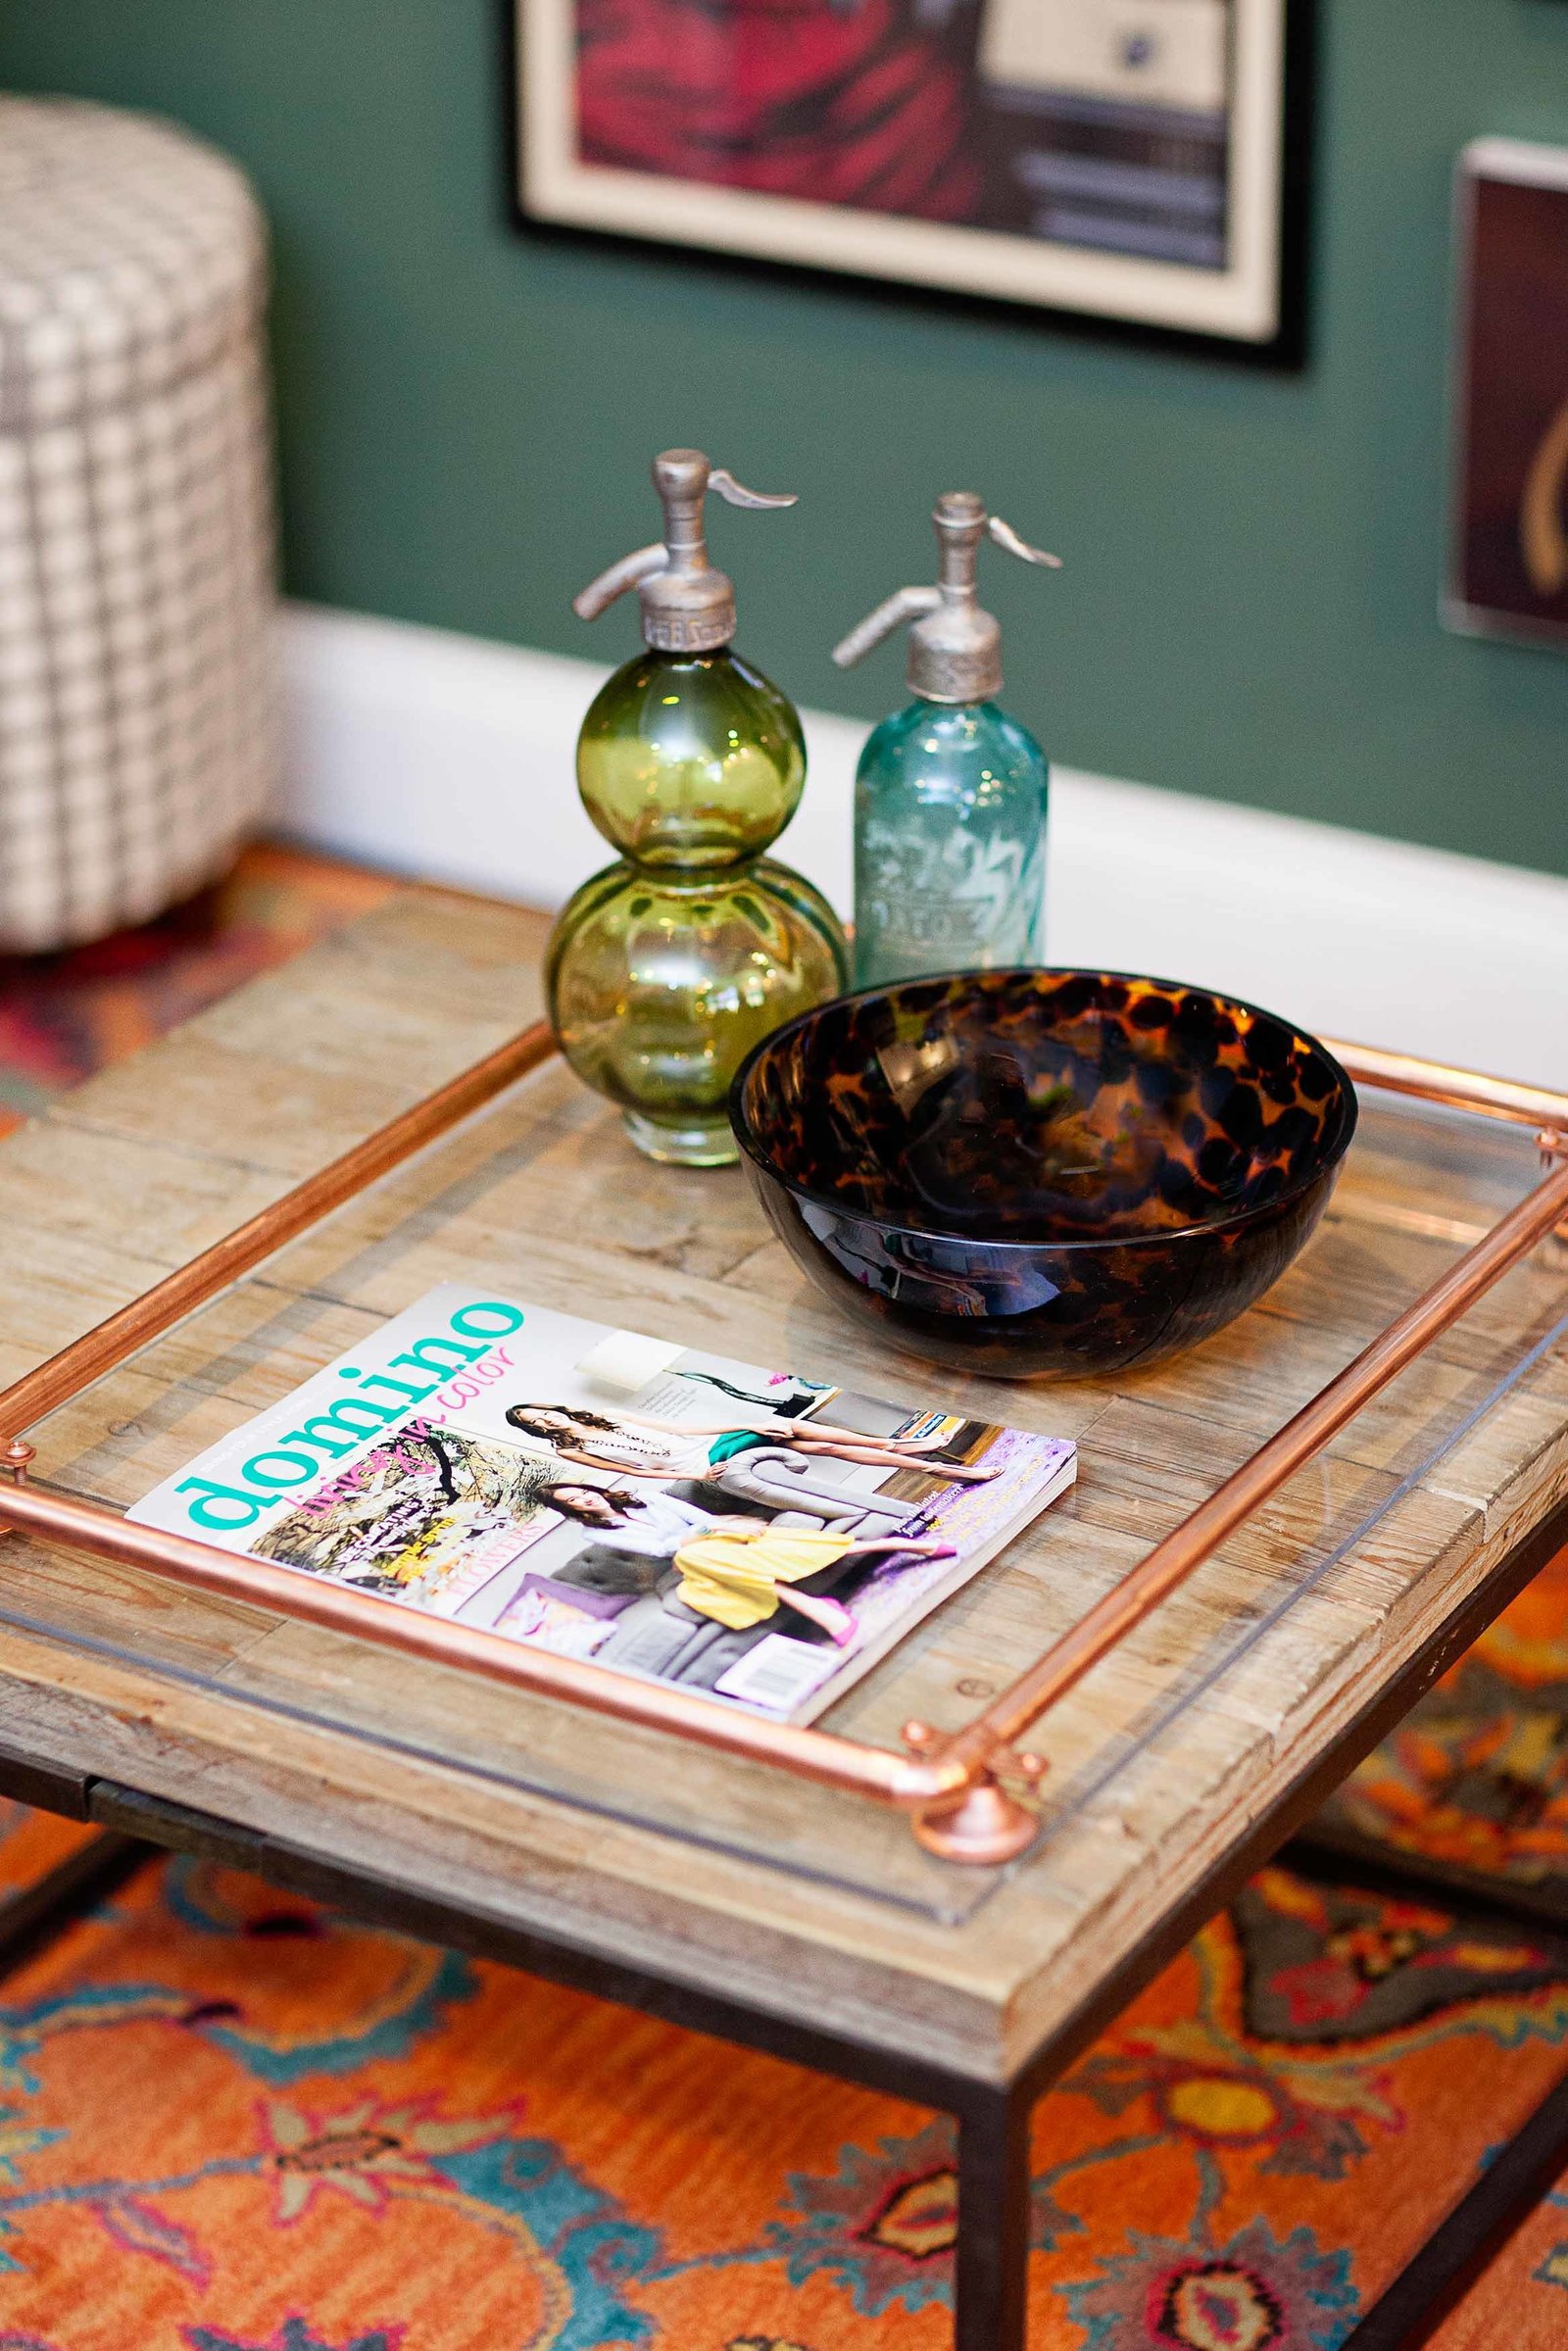 A coffee table with glass dishes and a domino magazine.